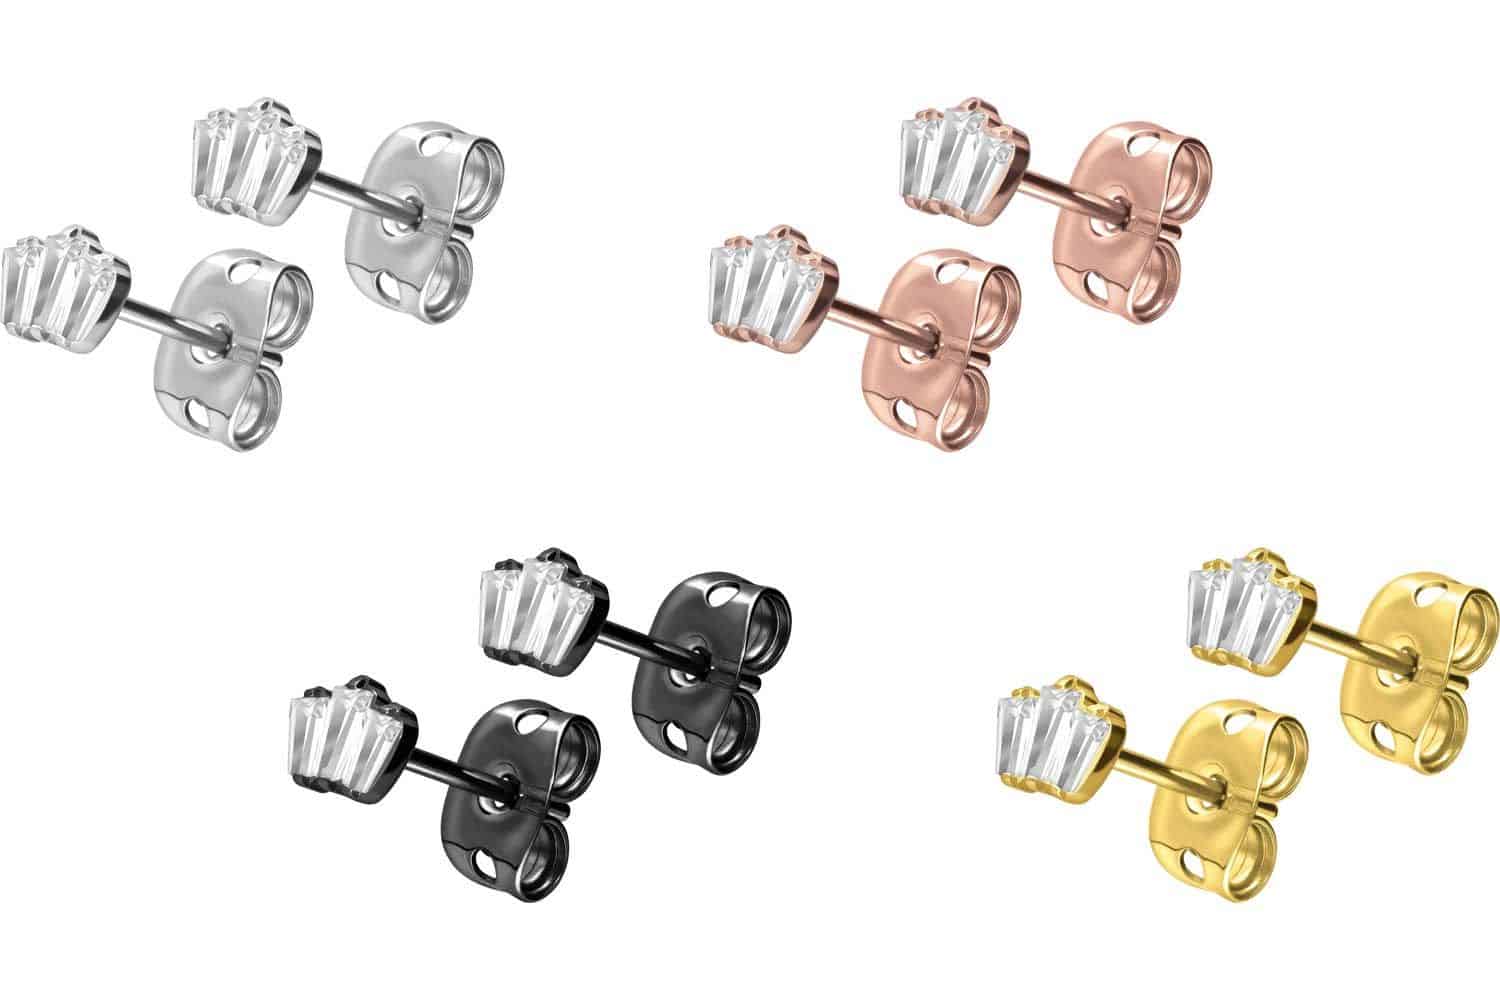 Titanium ear studs 3 SETTED CRYSTAL RECTANGLES